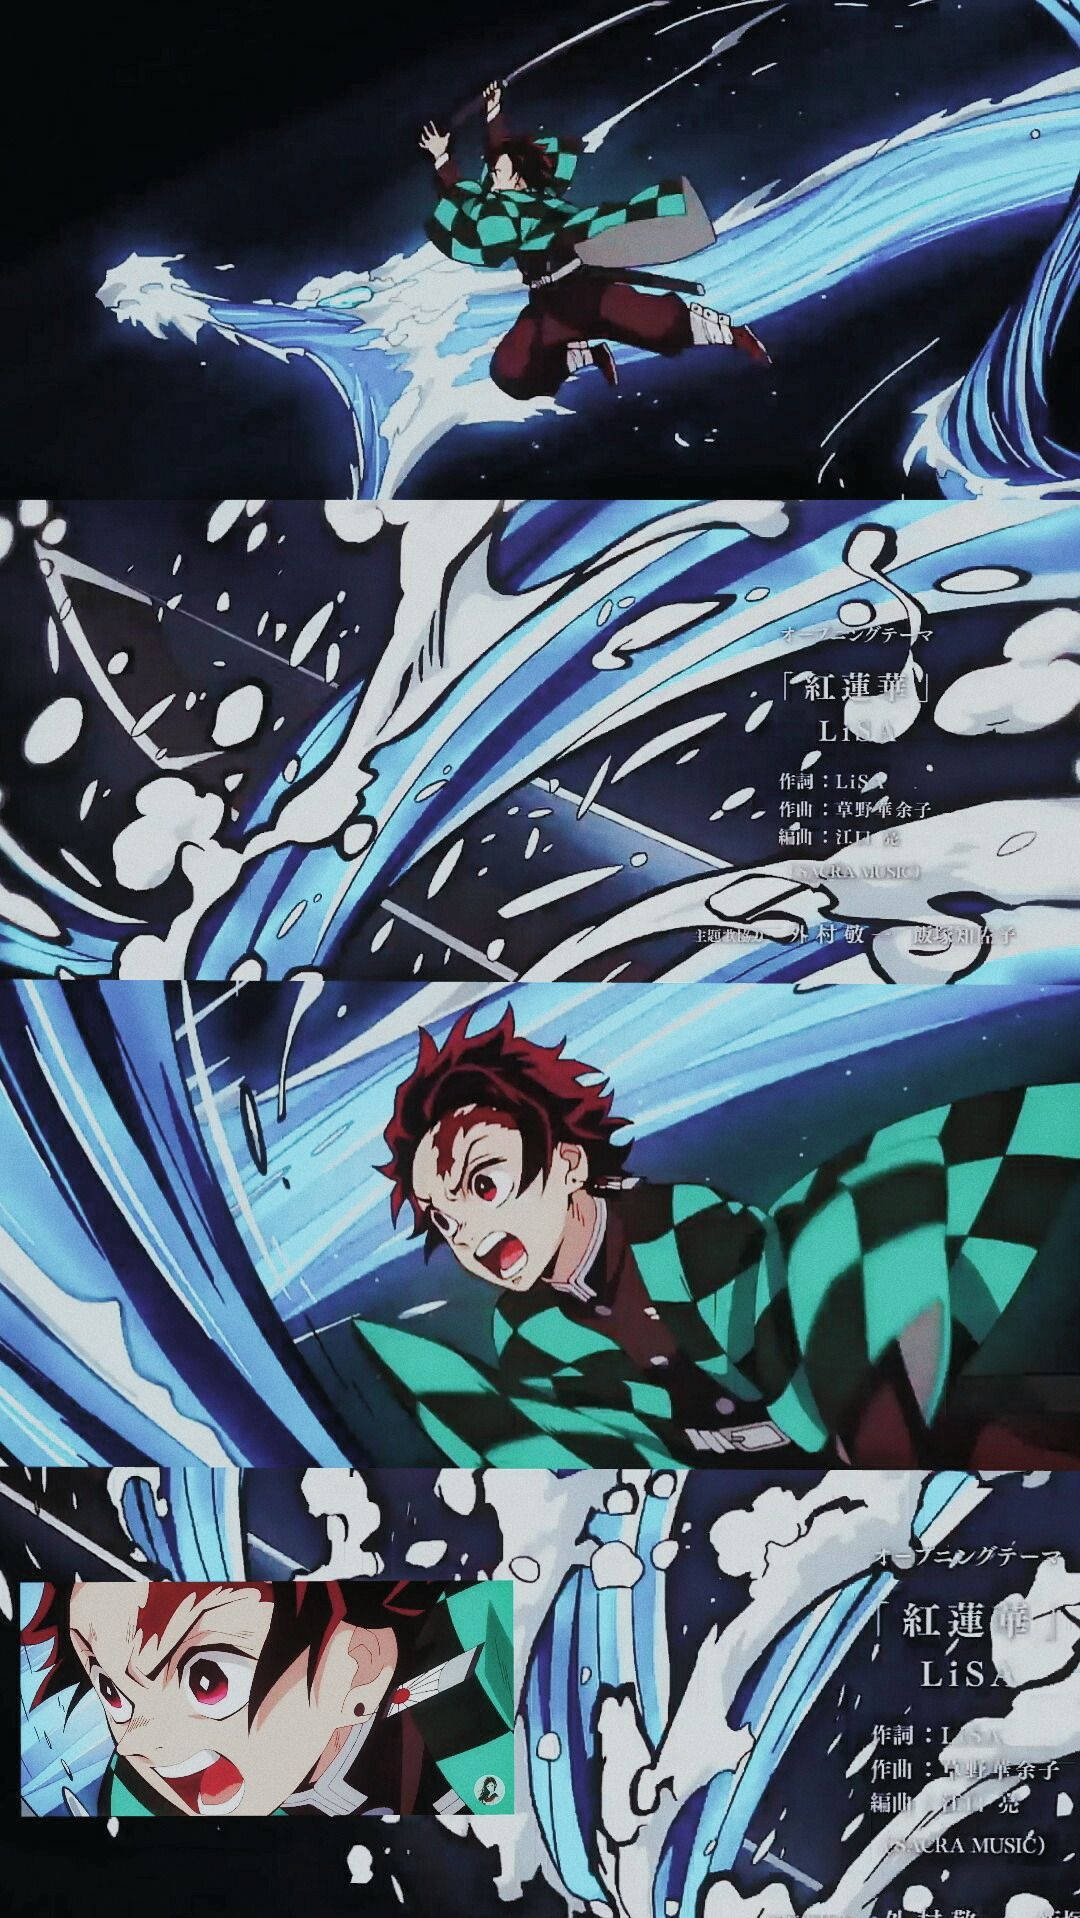 Tanjiro Kamado perfects his Water Breathing technique. Wallpaper